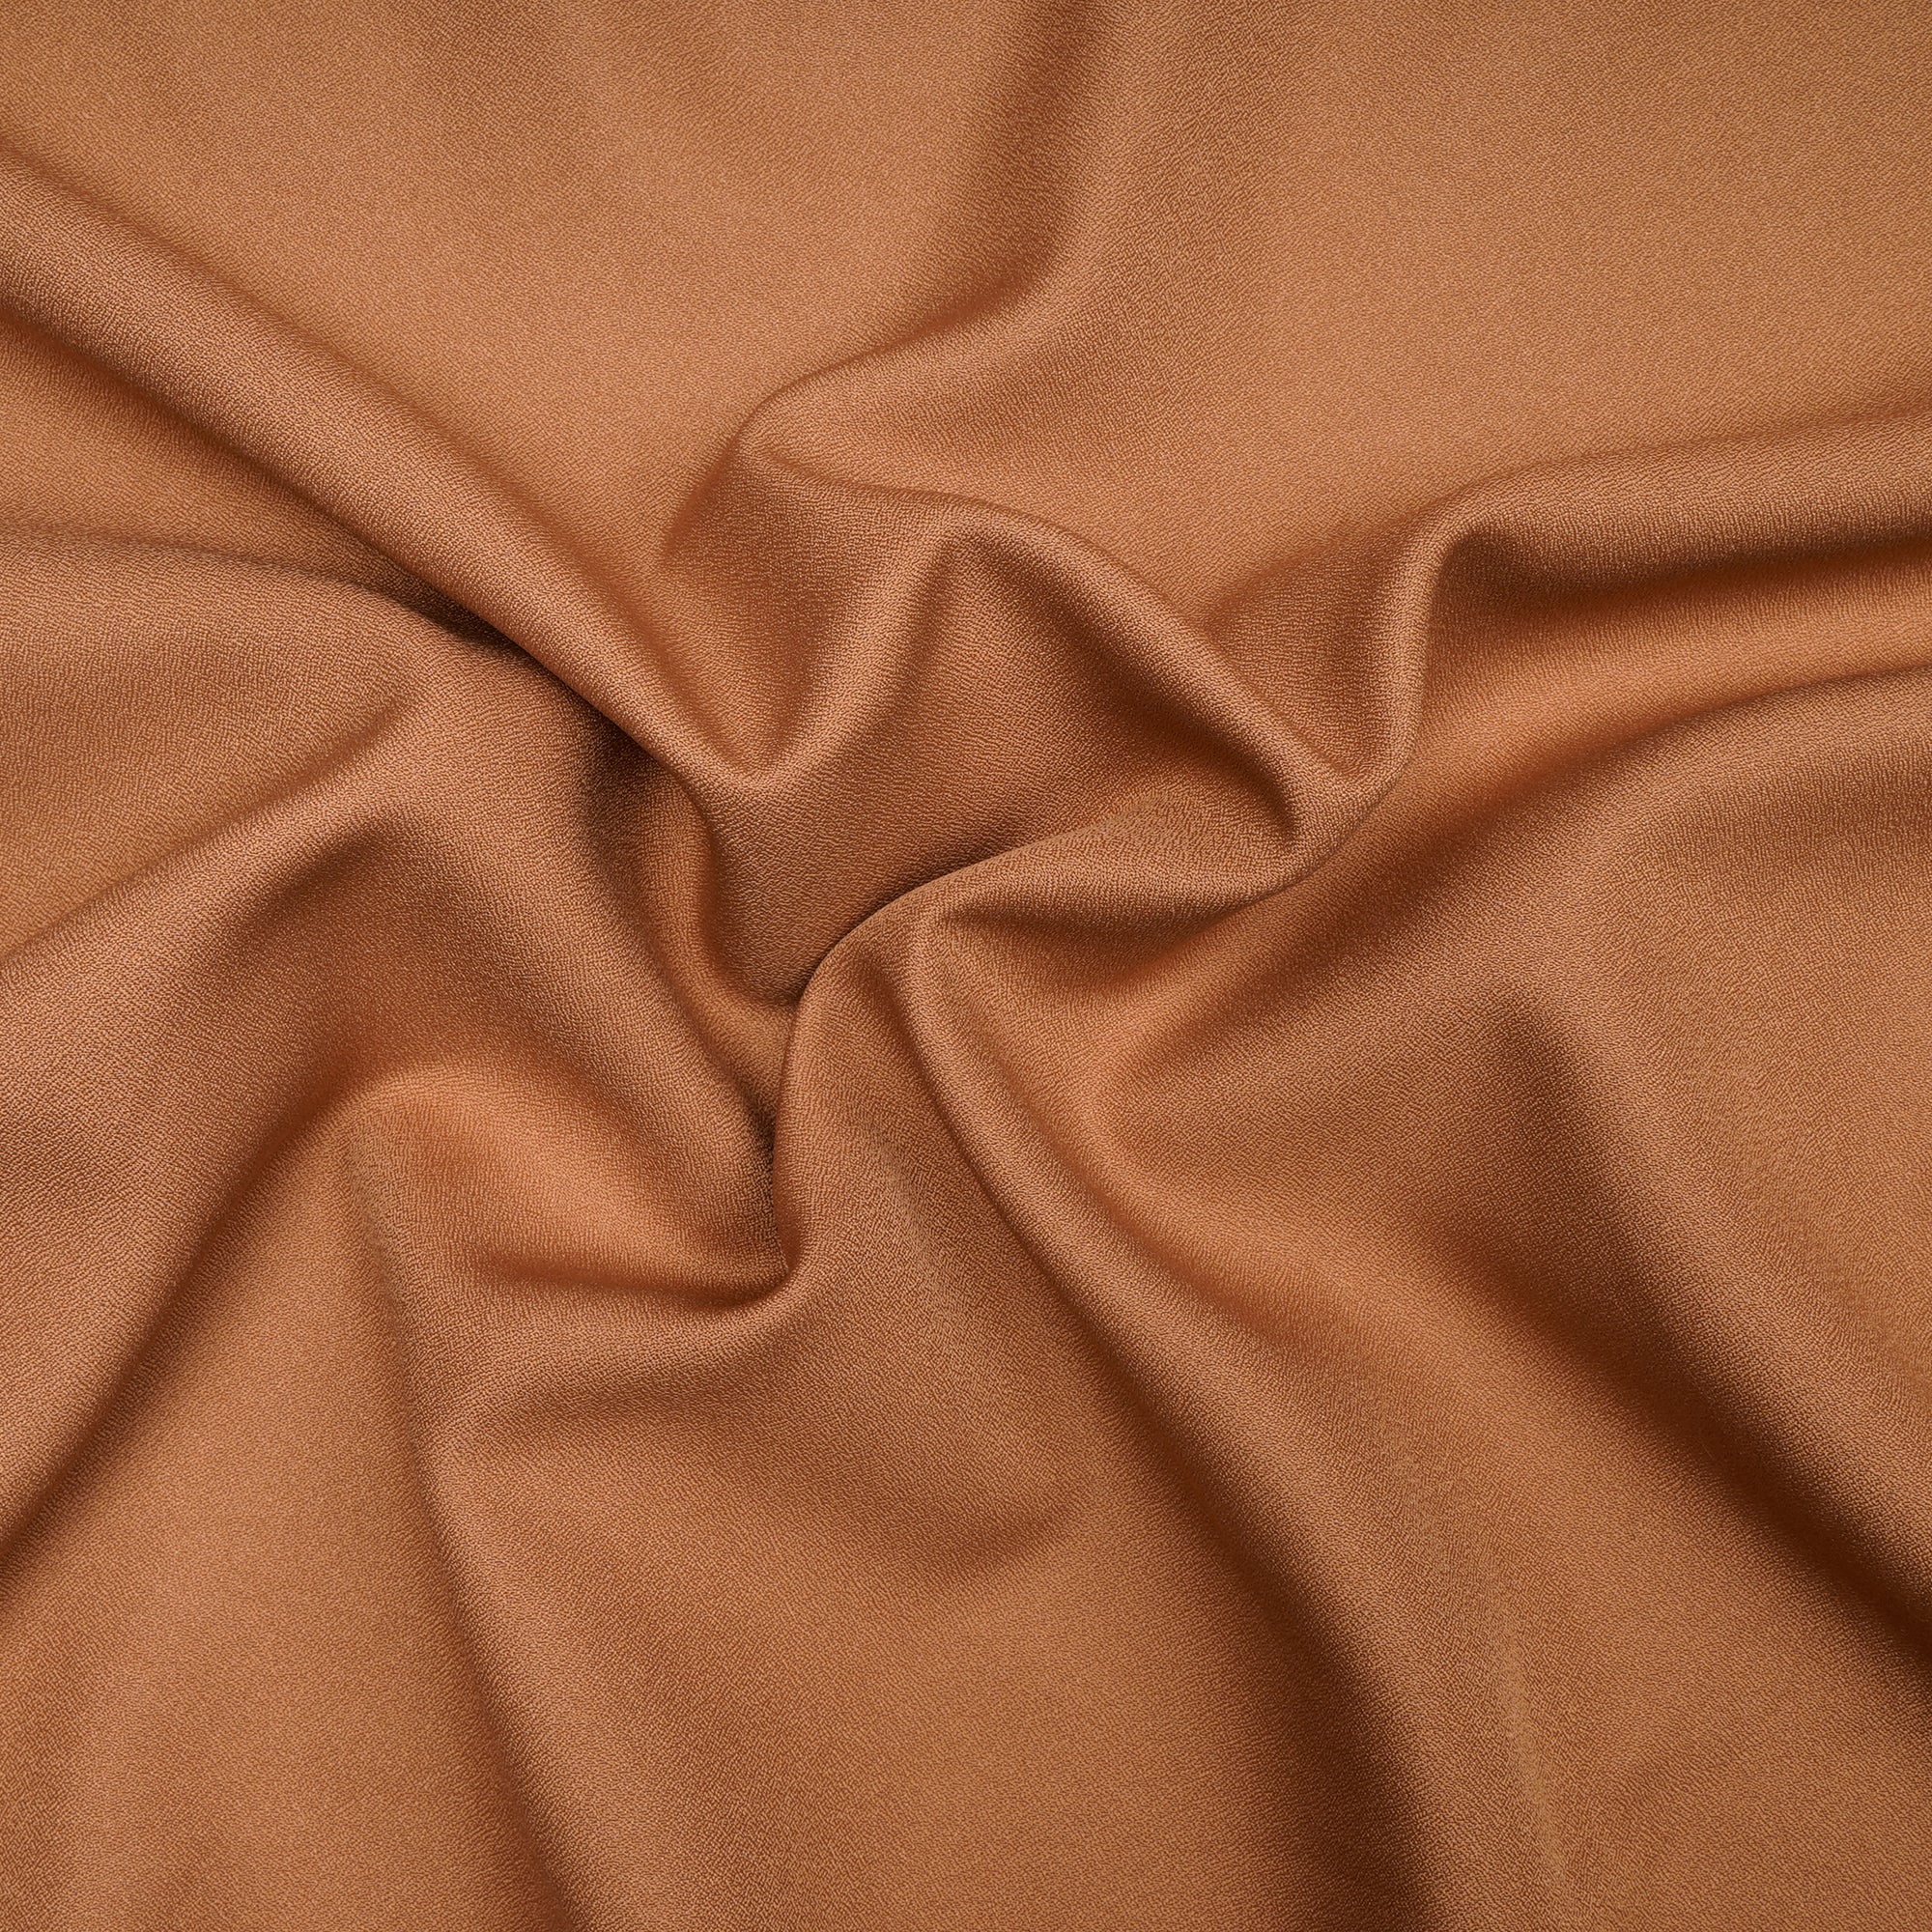 Copper Solid Dyed Imported Amazon Moss Crepe Fabric (60" Width)